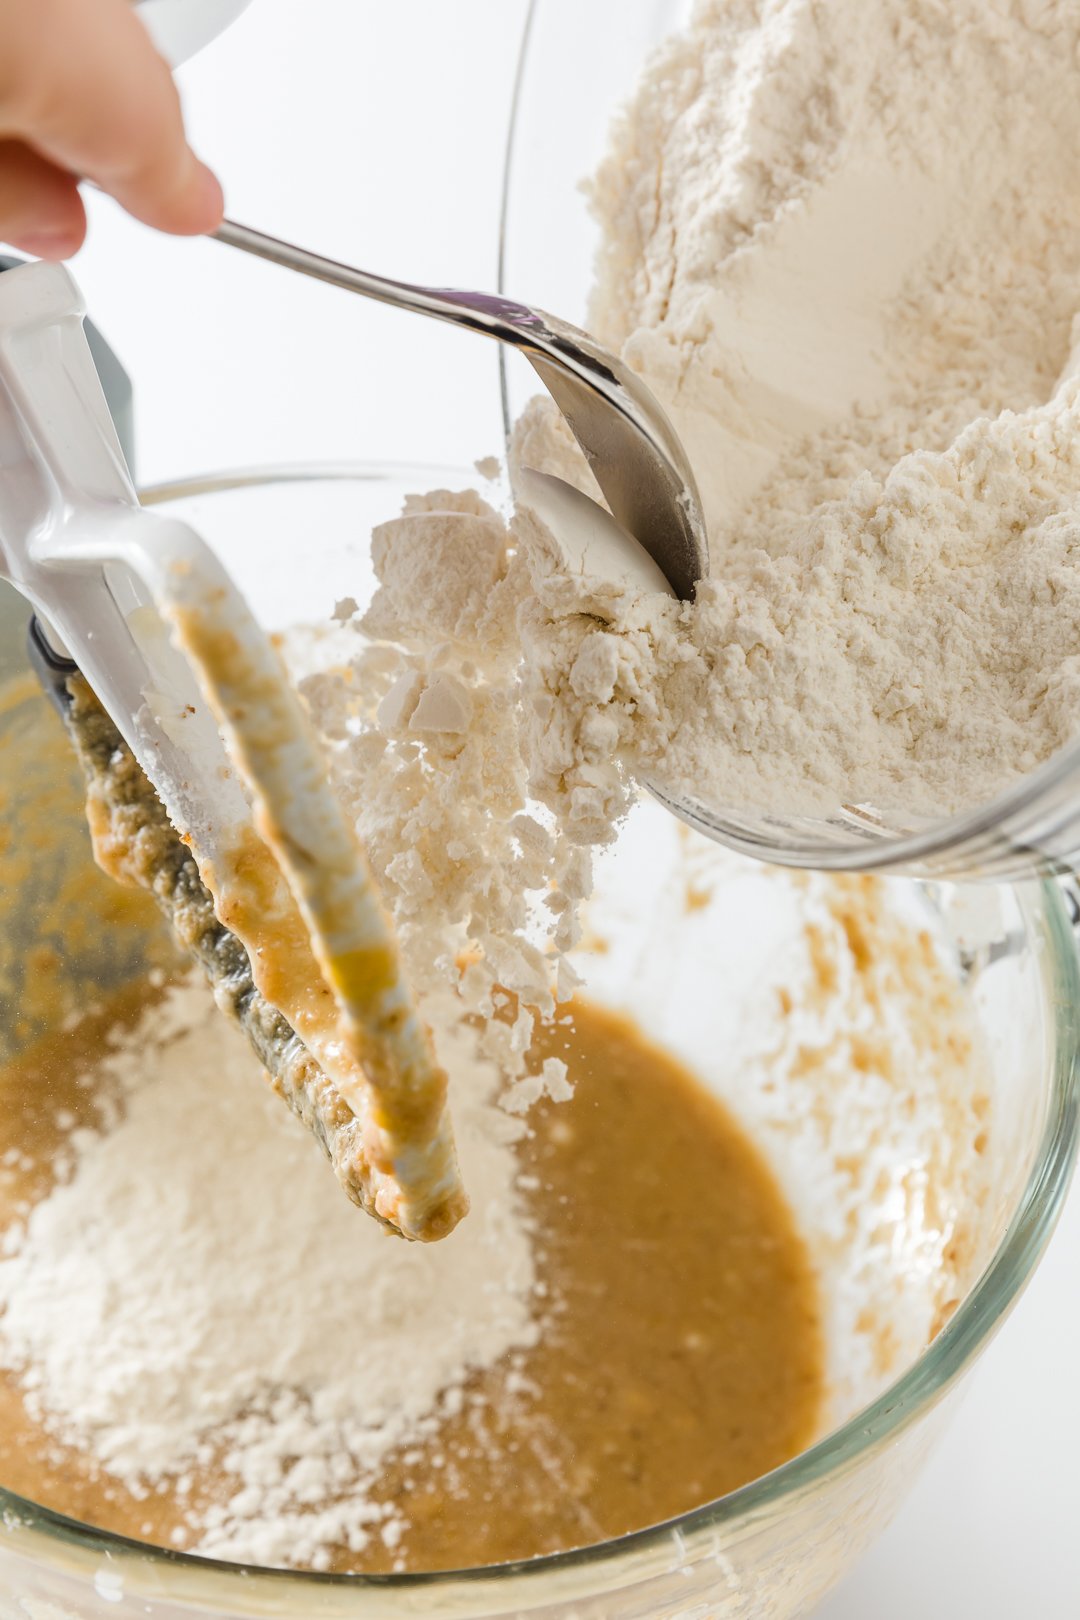 Add a little of the dry ingredients to the bowl of a stand mixer